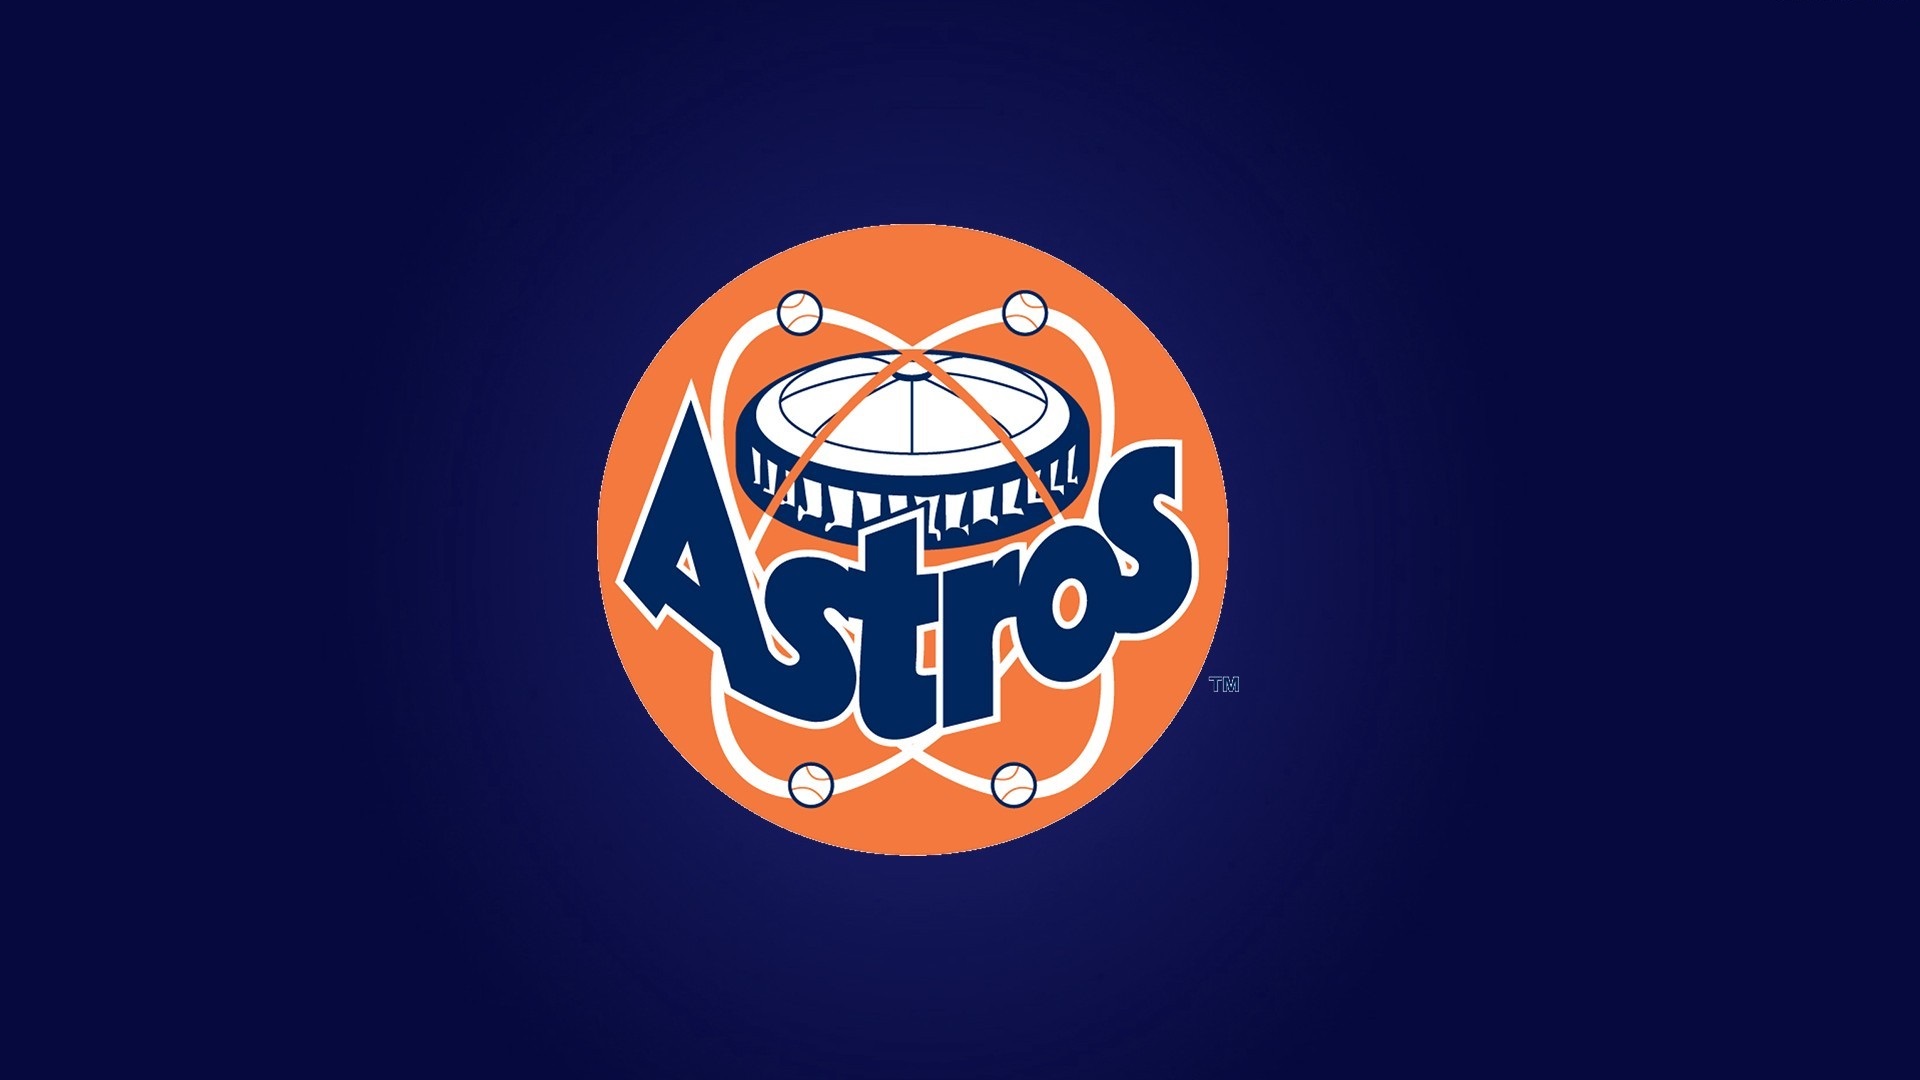 Wallpapers HD Houston Astros Logo With high-resolution 1920X1080 pixel. You can use this wallpaper for Mac Desktop Wallpaper, Laptop Screensavers, Android Wallpapers, Tablet or iPhone Home Screen and another mobile phone device